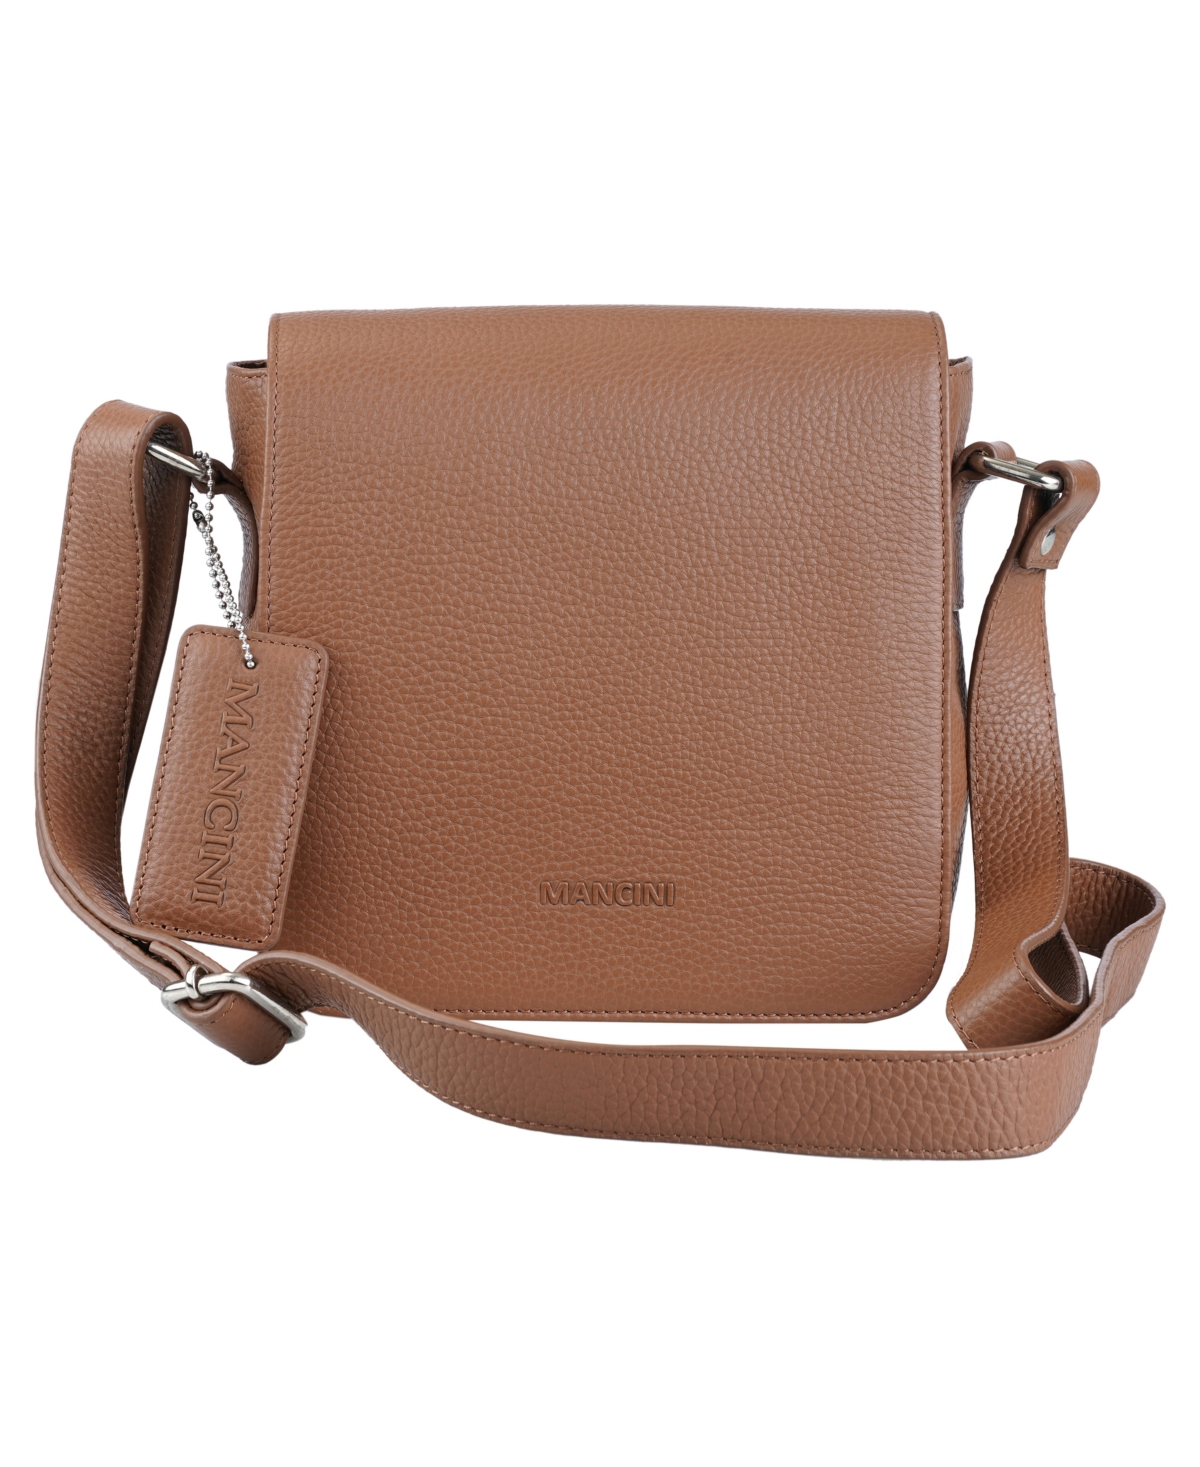 Mancini Pebbled Collection Page Leather Crossbody Bag In Camel